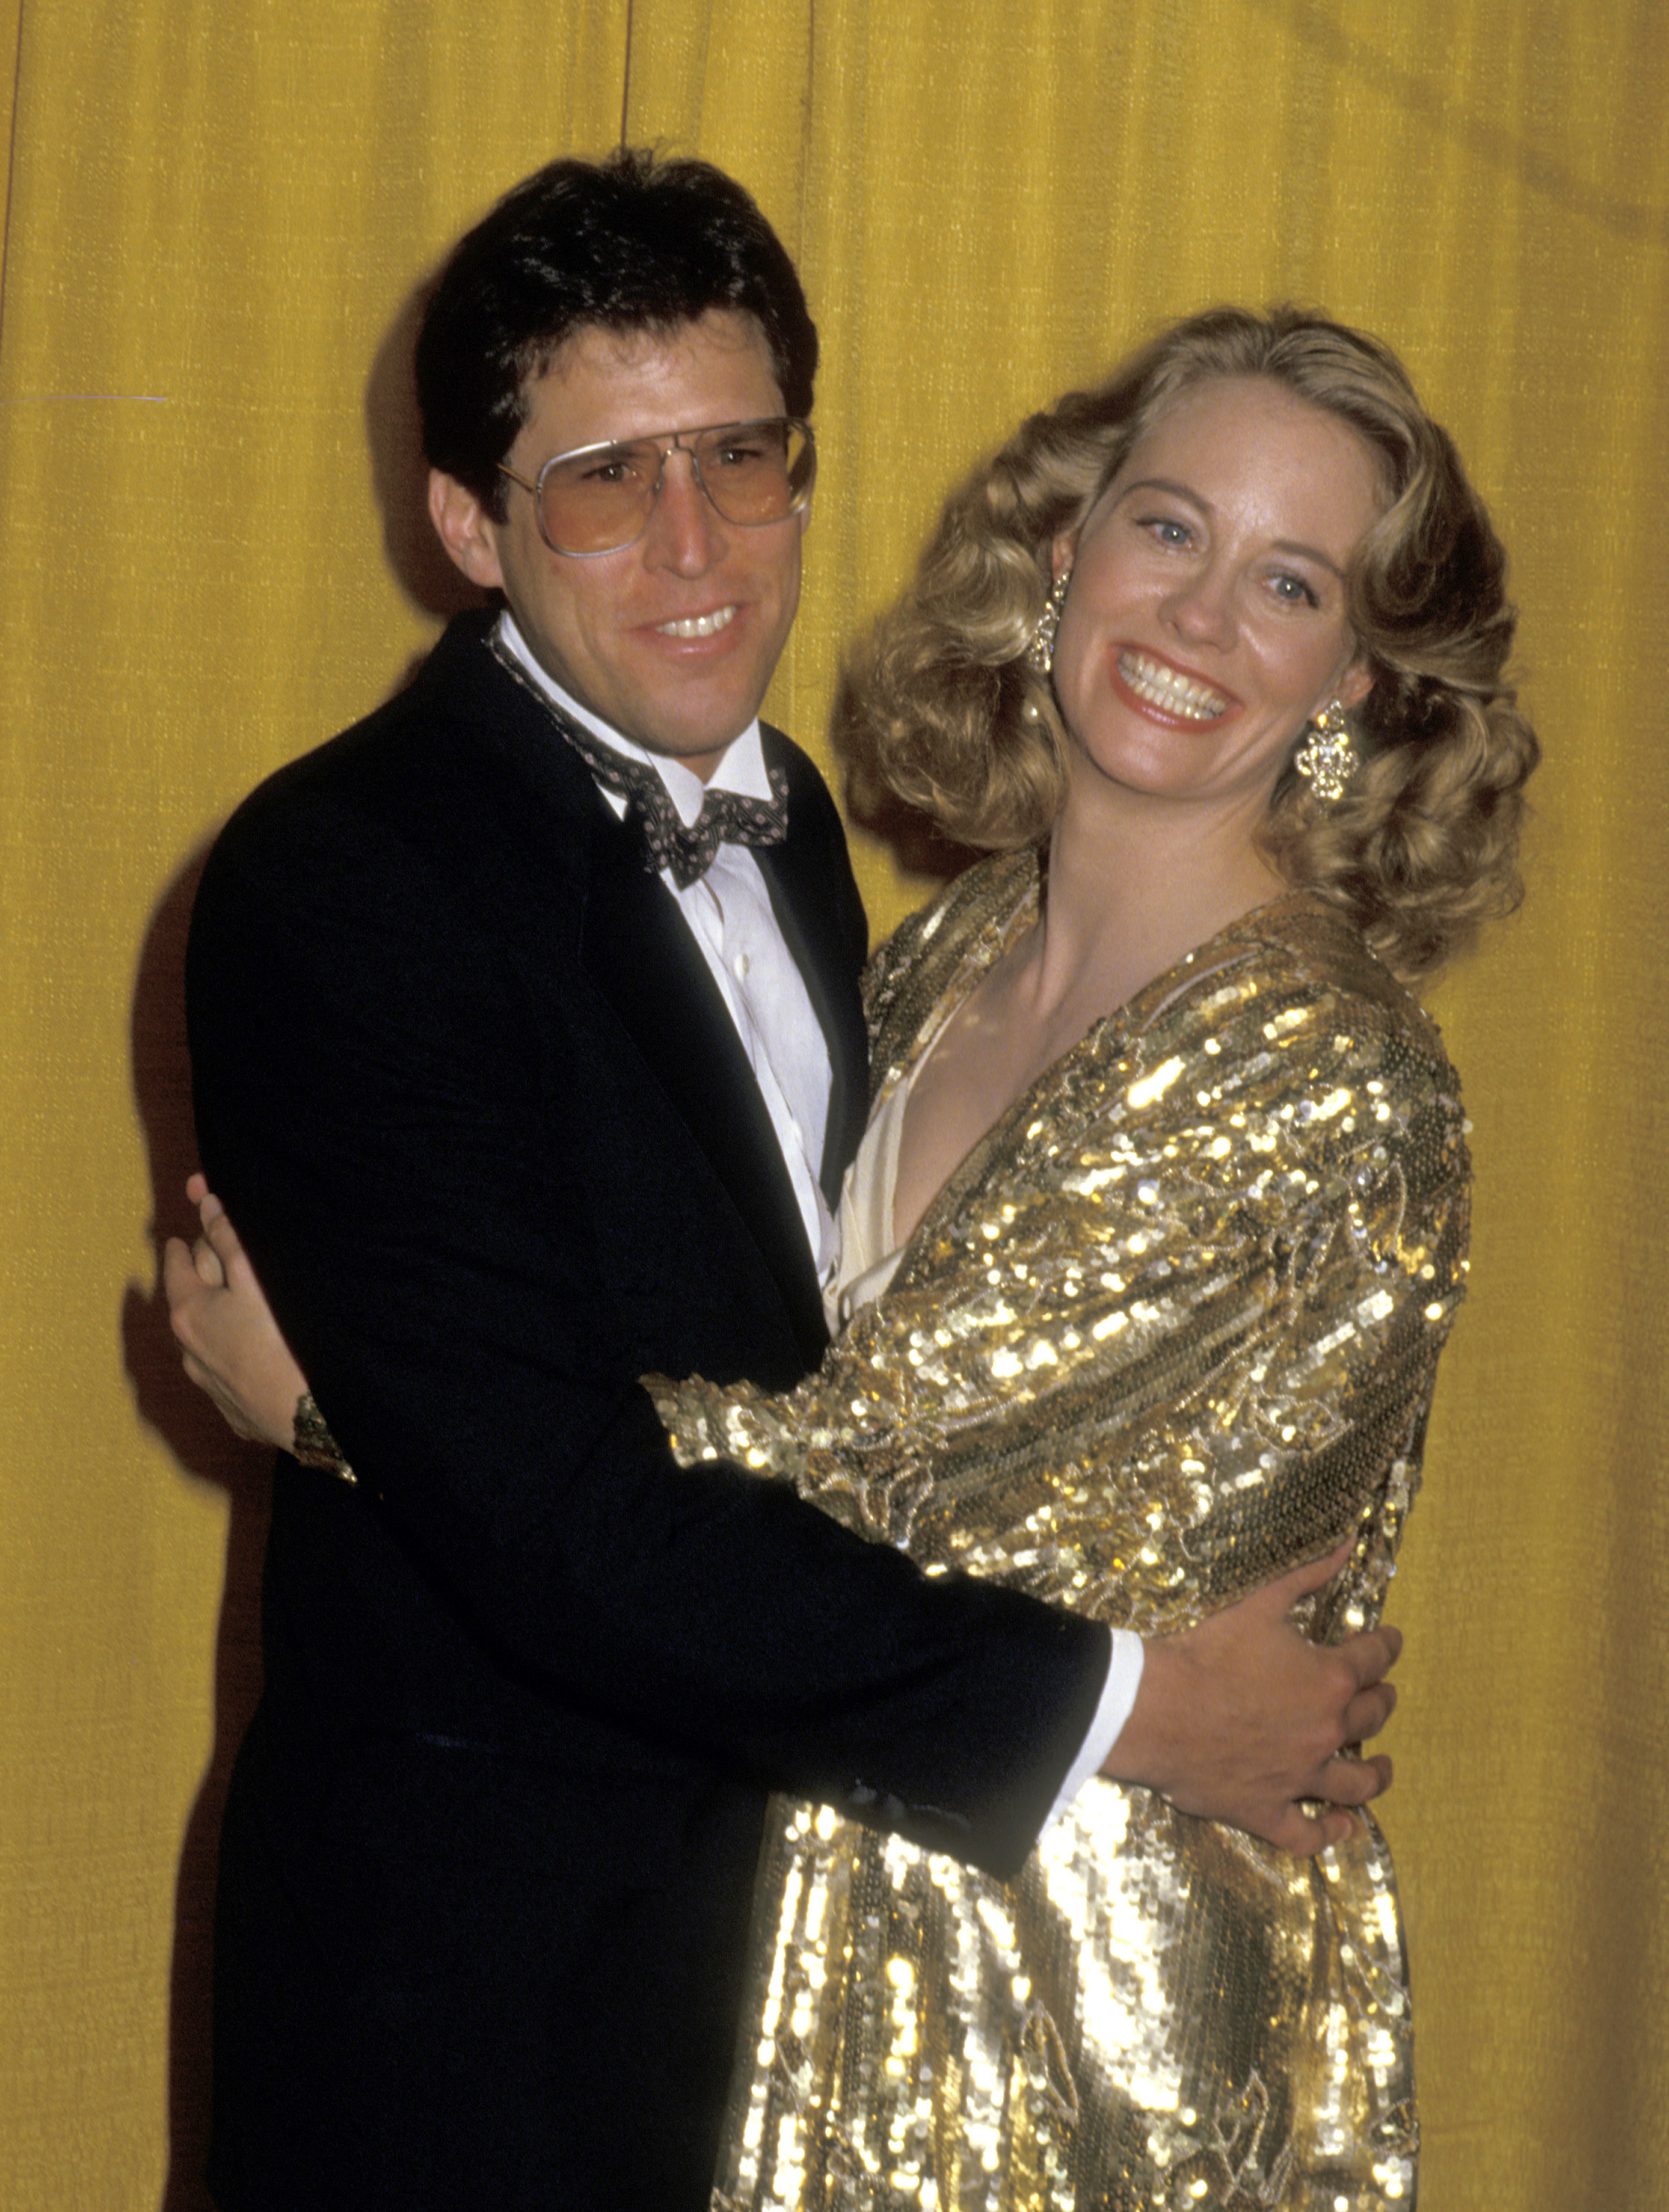 Bruce Oppenheim and Cybill Shepherd attend the 13th Annual People's Choice Awards at Santa Monica Civic Auditorium in March 1987, in Santa Monica, California. | Source: Getty Images